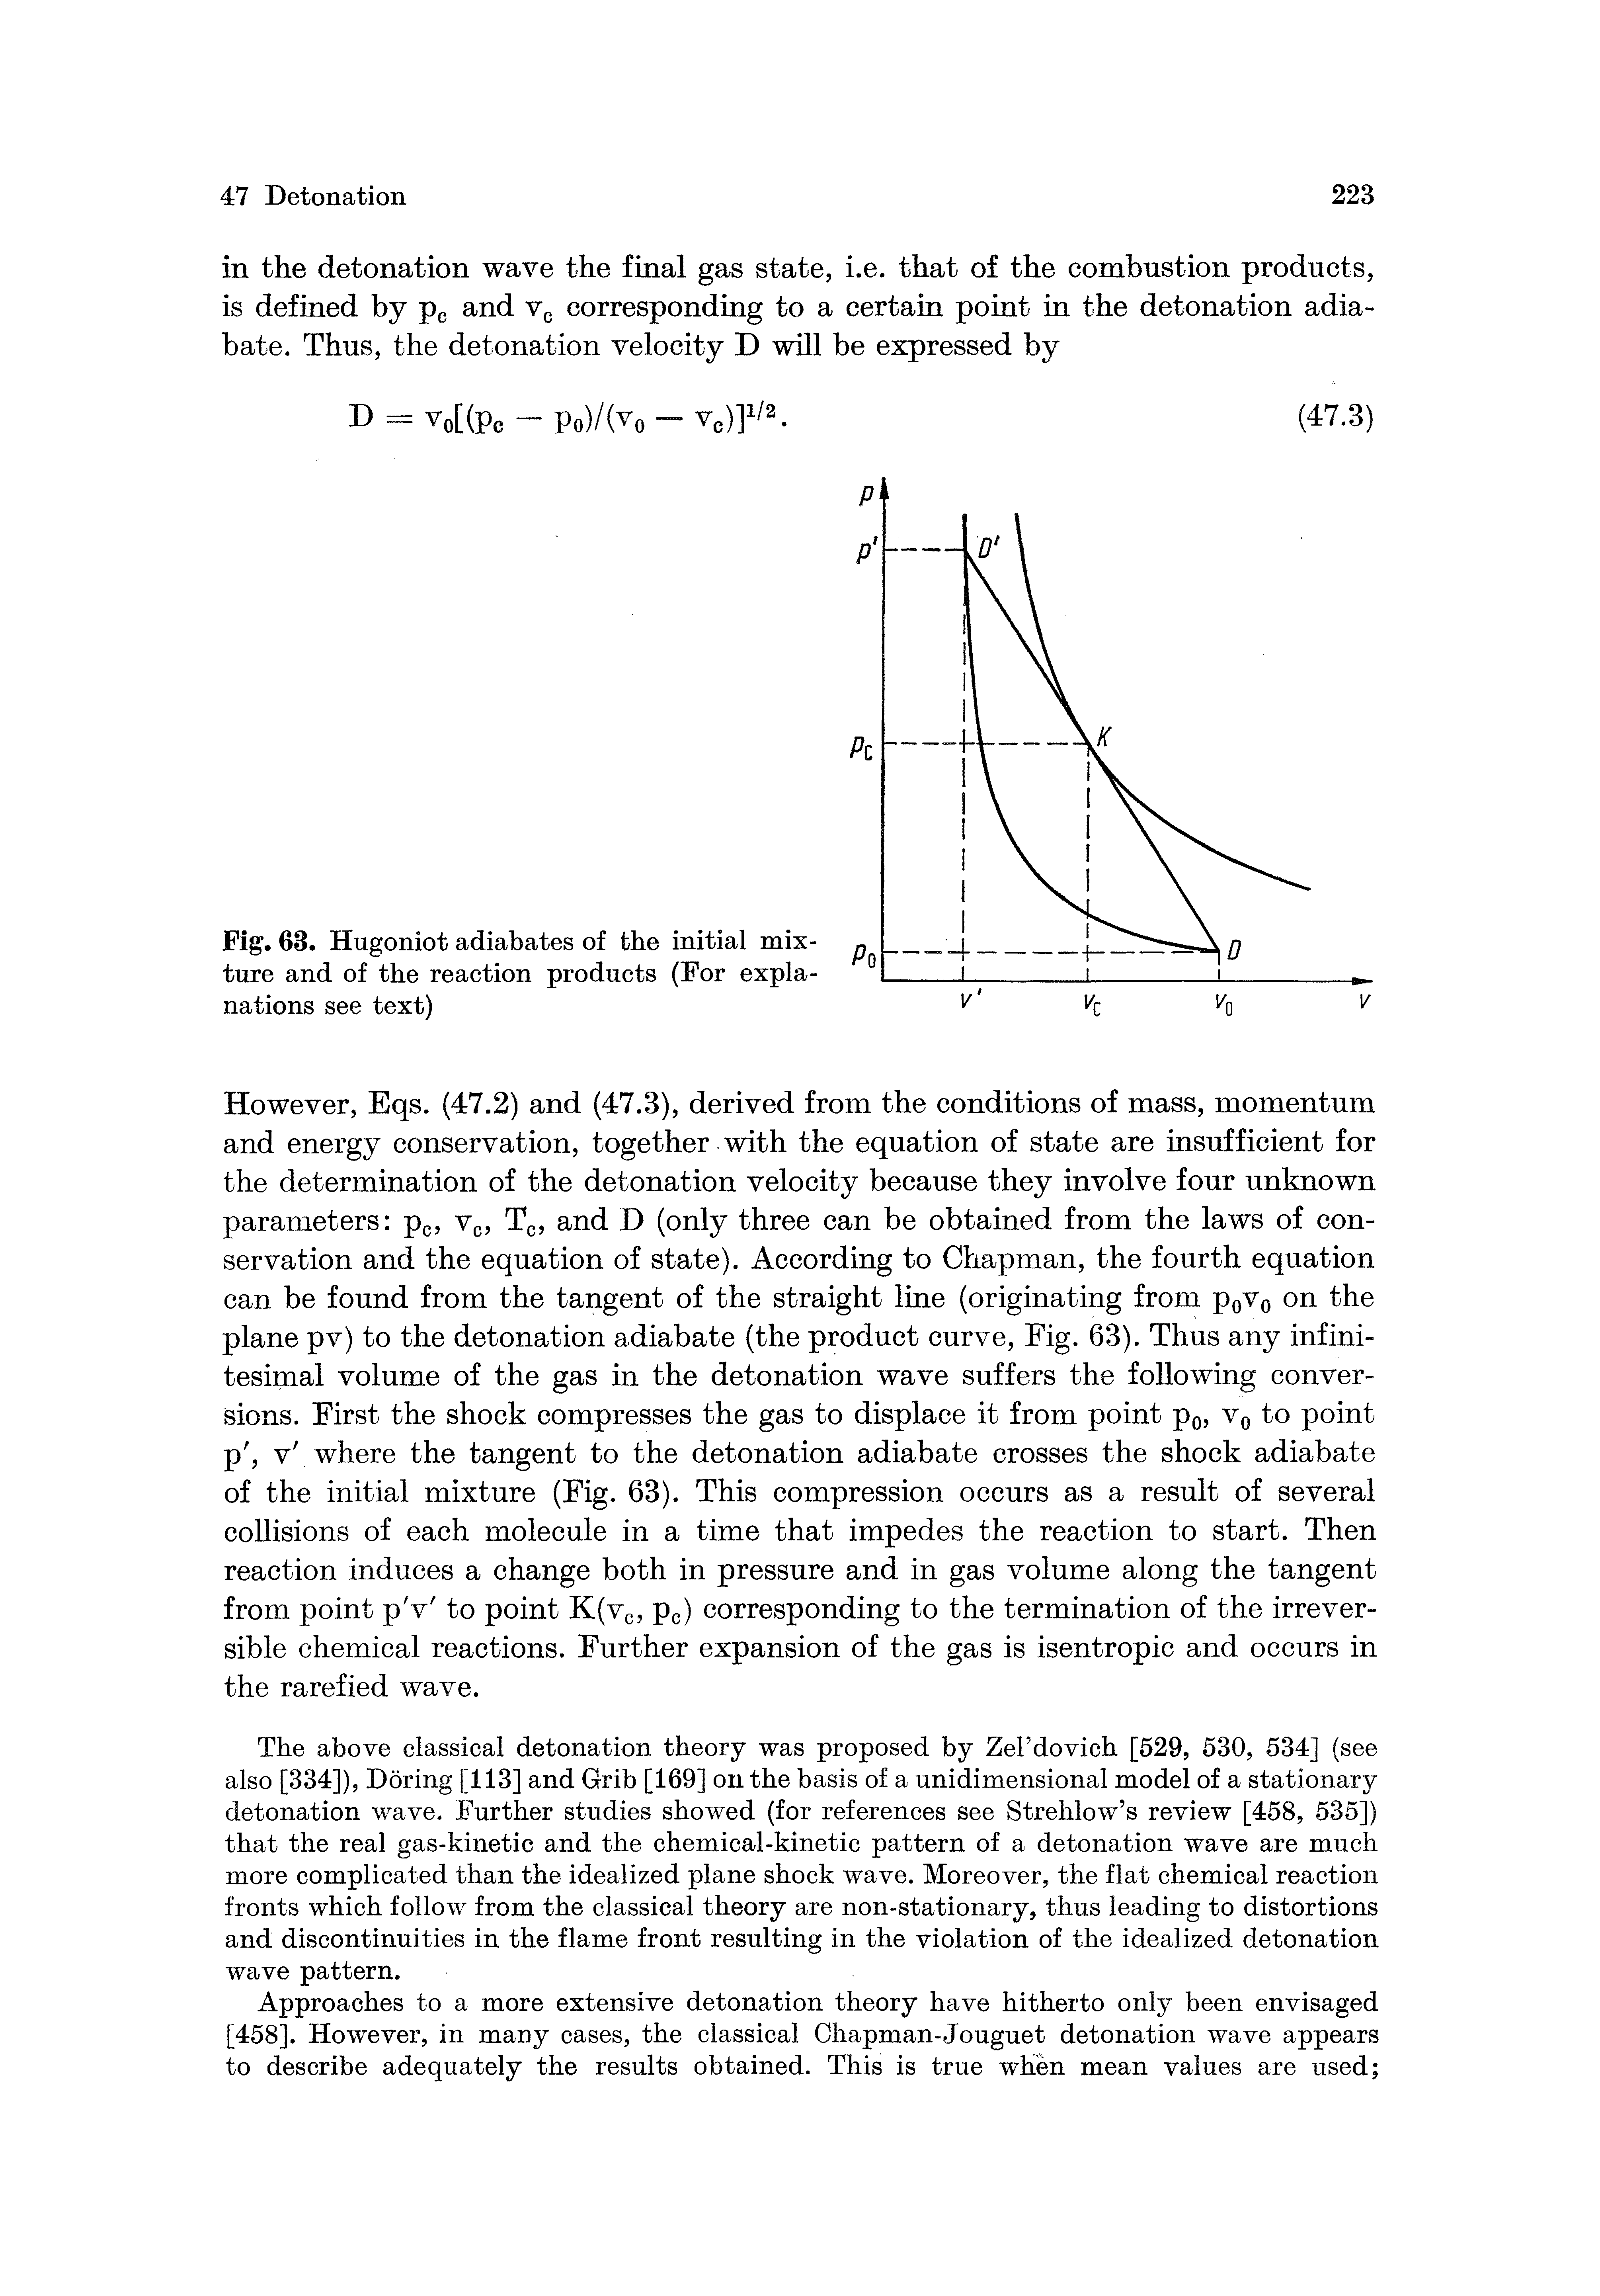 Fig. 68. Hugoniot adiabates of the initial mixture and of the reaction products (For explanations see text)...